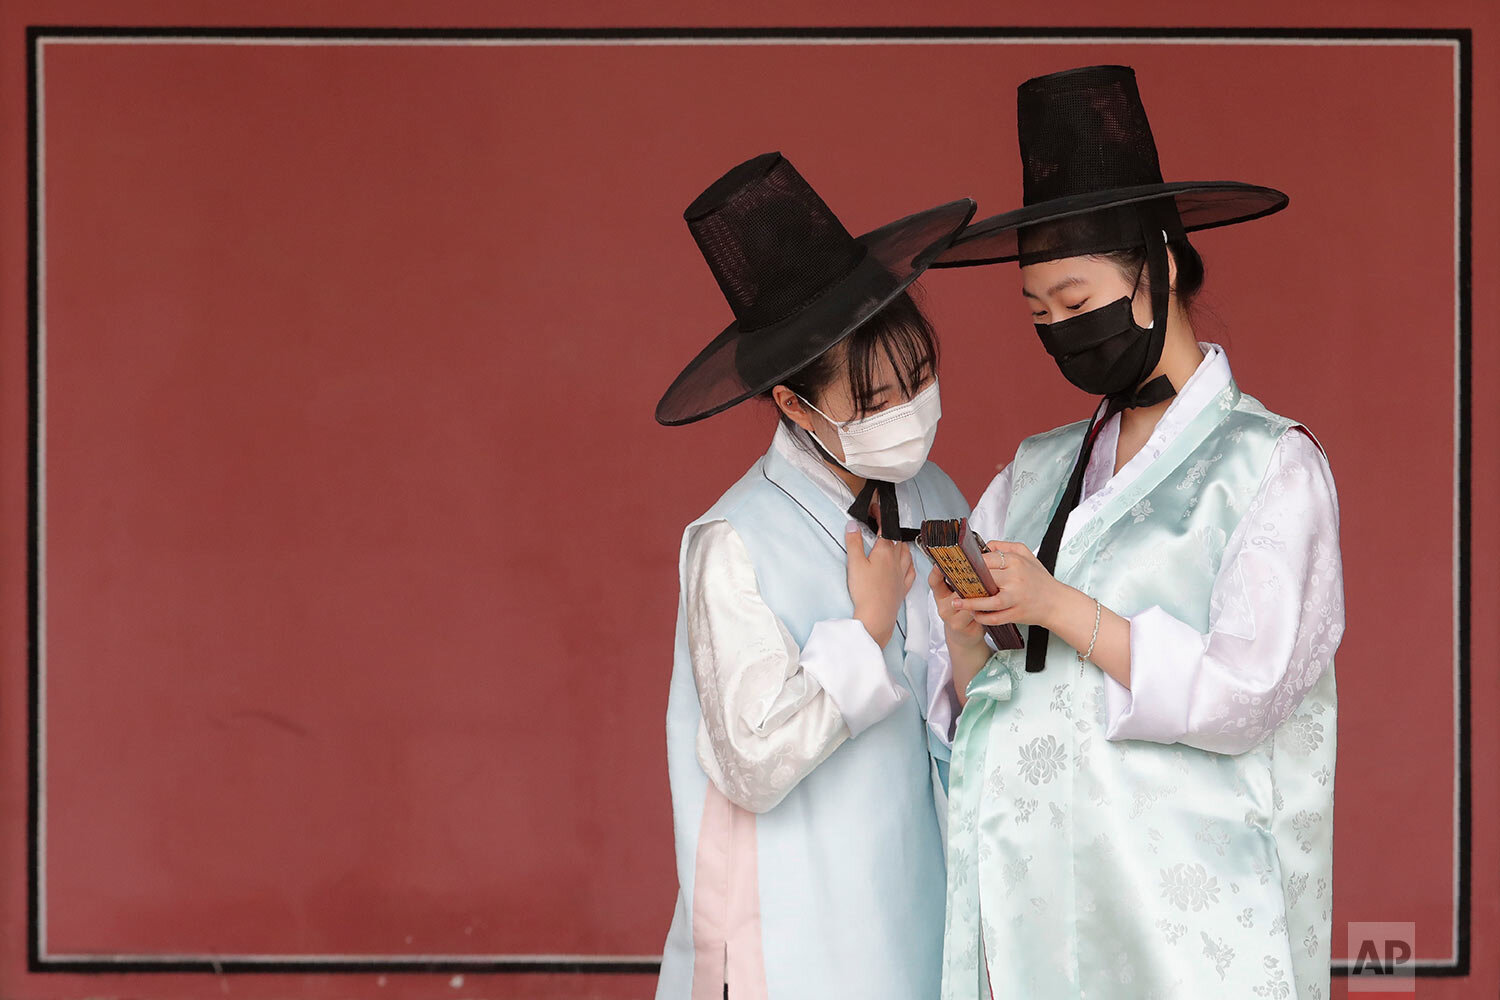  Women wearing face masks to help protect against the spread of the new coronavirus watch a mobile phone at the Gyeongbok Palace, one of South Korea's well-known landmarks, in Seoul, South Korea, Saturday, July 25, 2020.  (AP Photo/Ahn Young-joon) 